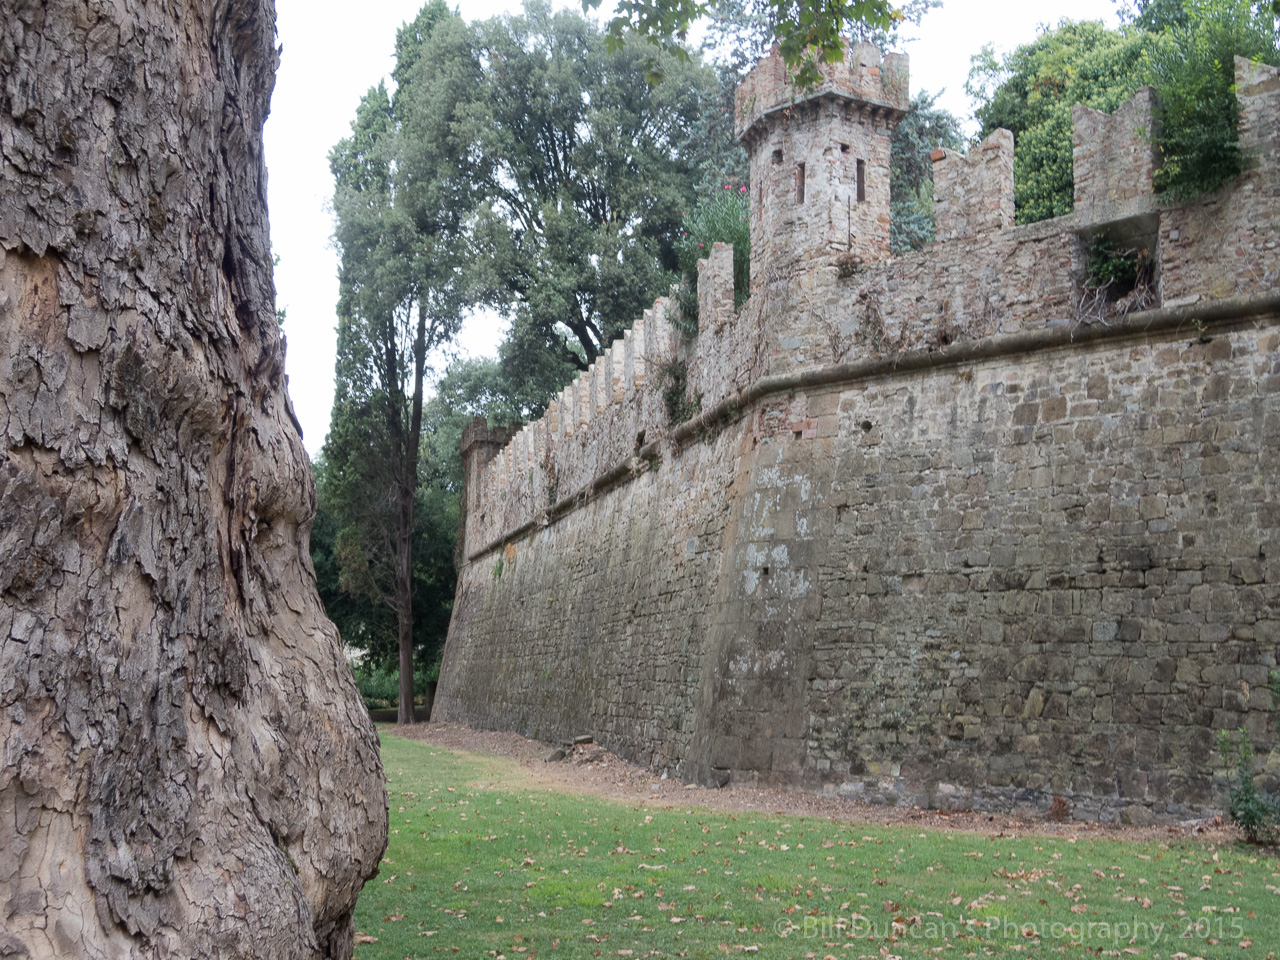 A private estate is bordered by the Roman wall.